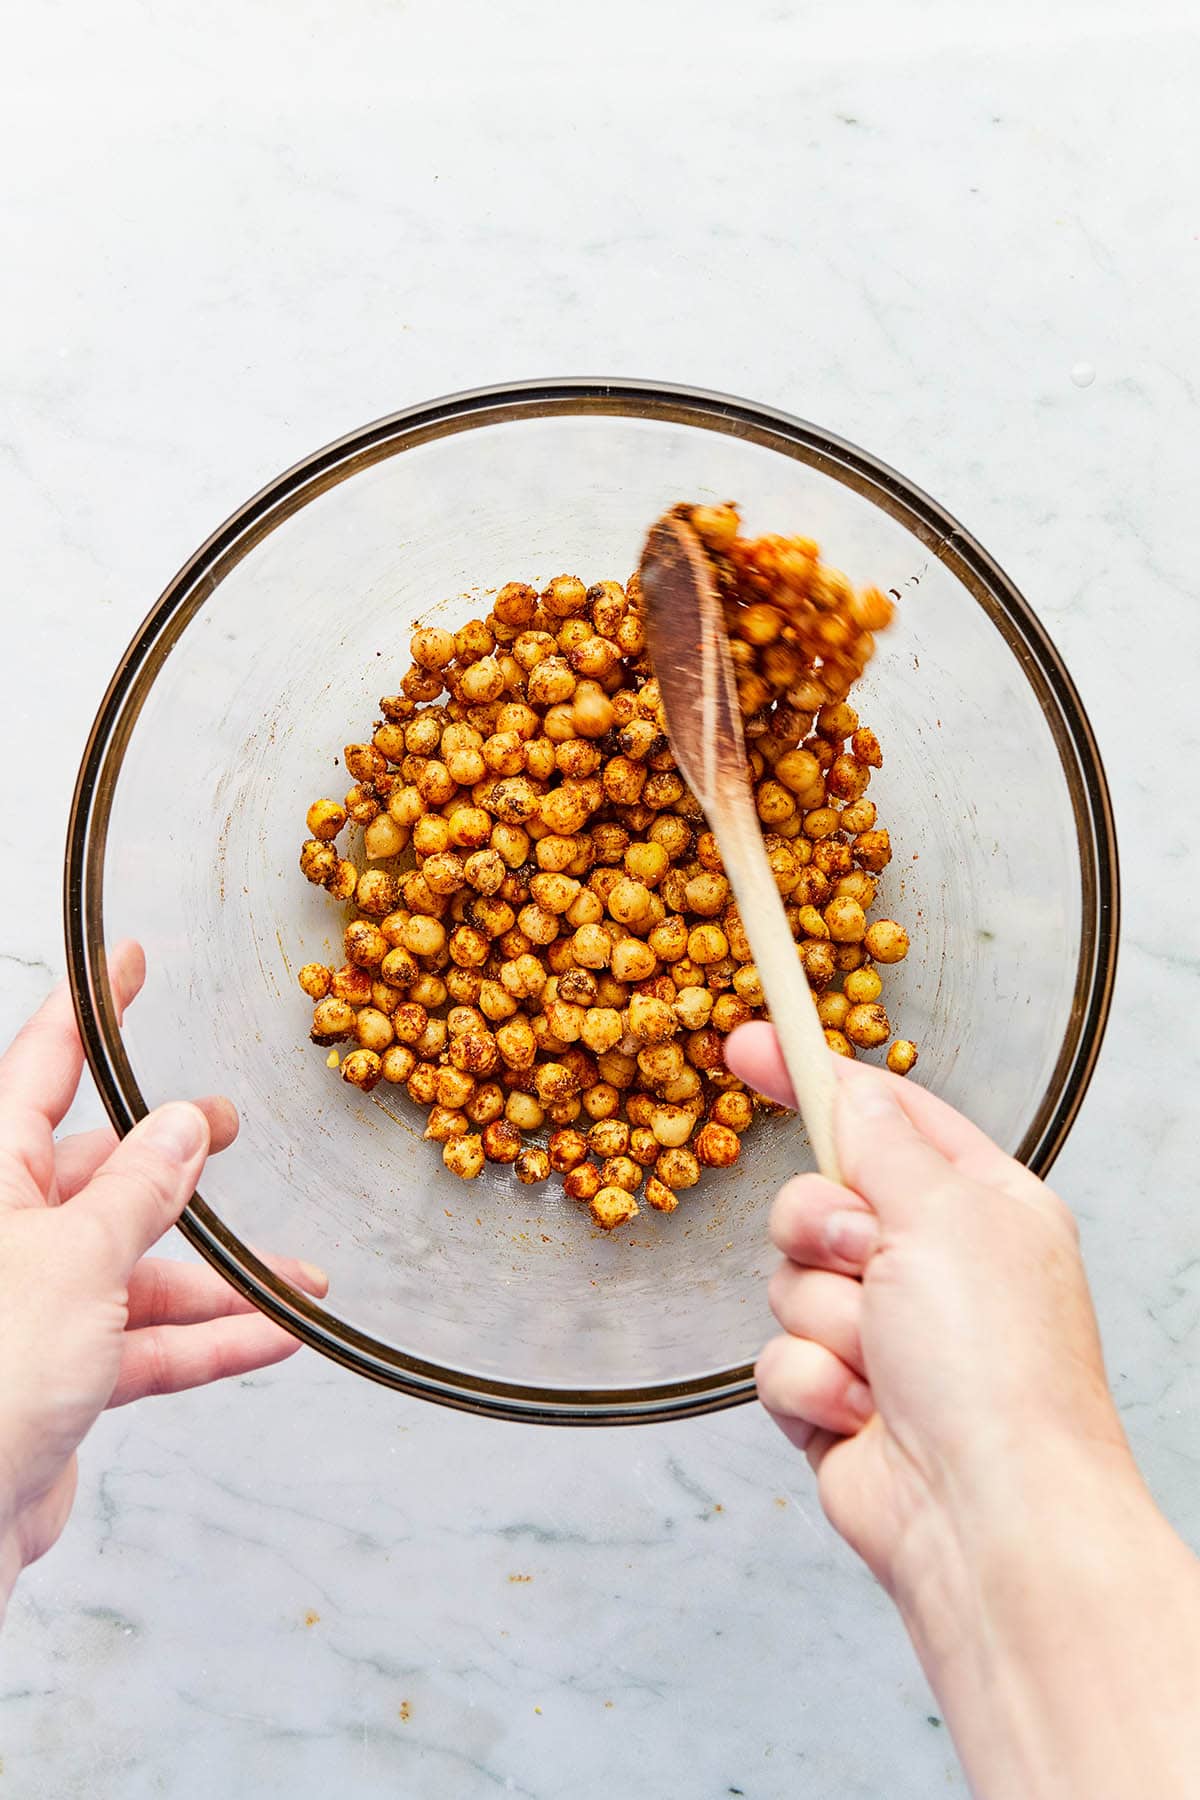 A hand stirring chickpeas and spices in a glass bowl using a wooden spoon.